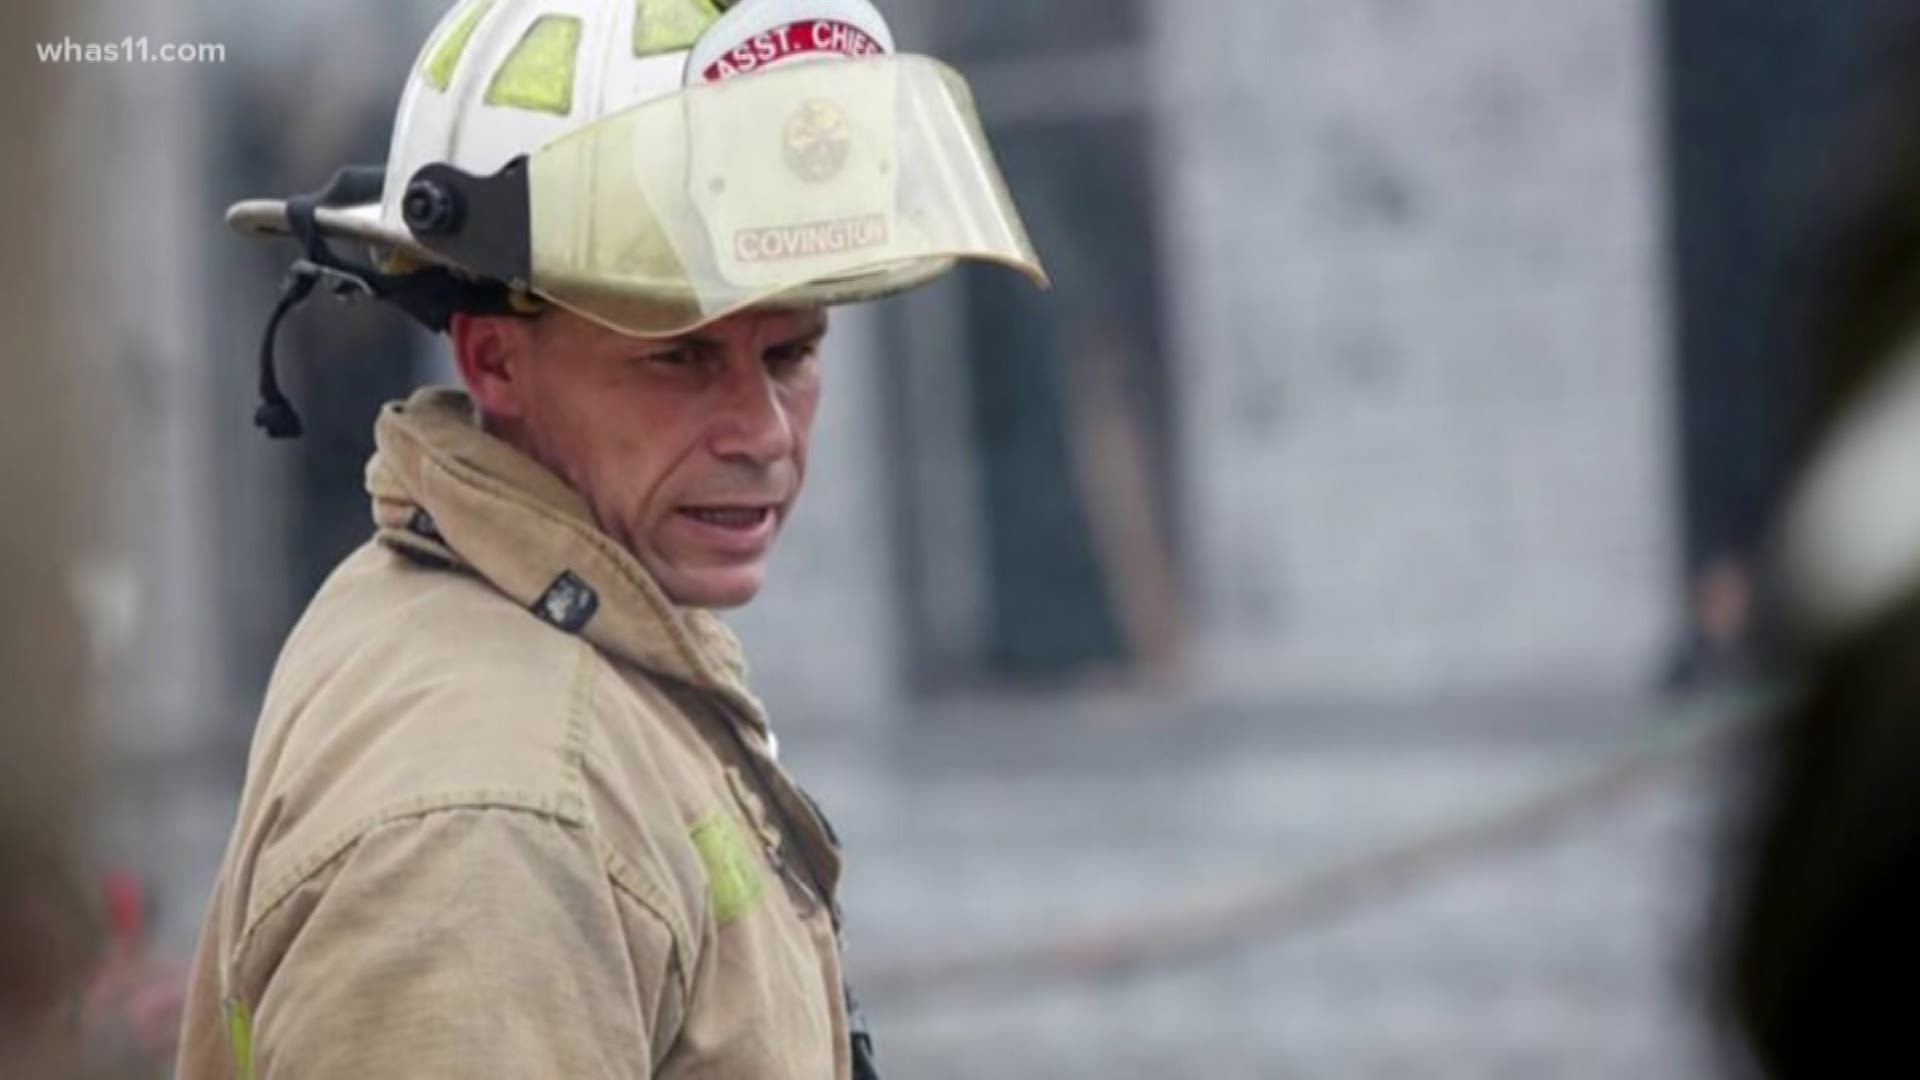 Firefighters across Kentucky will have a new resource to get help for their mental health thanks to a new bill just signed into law by Governor Matt Bevin.